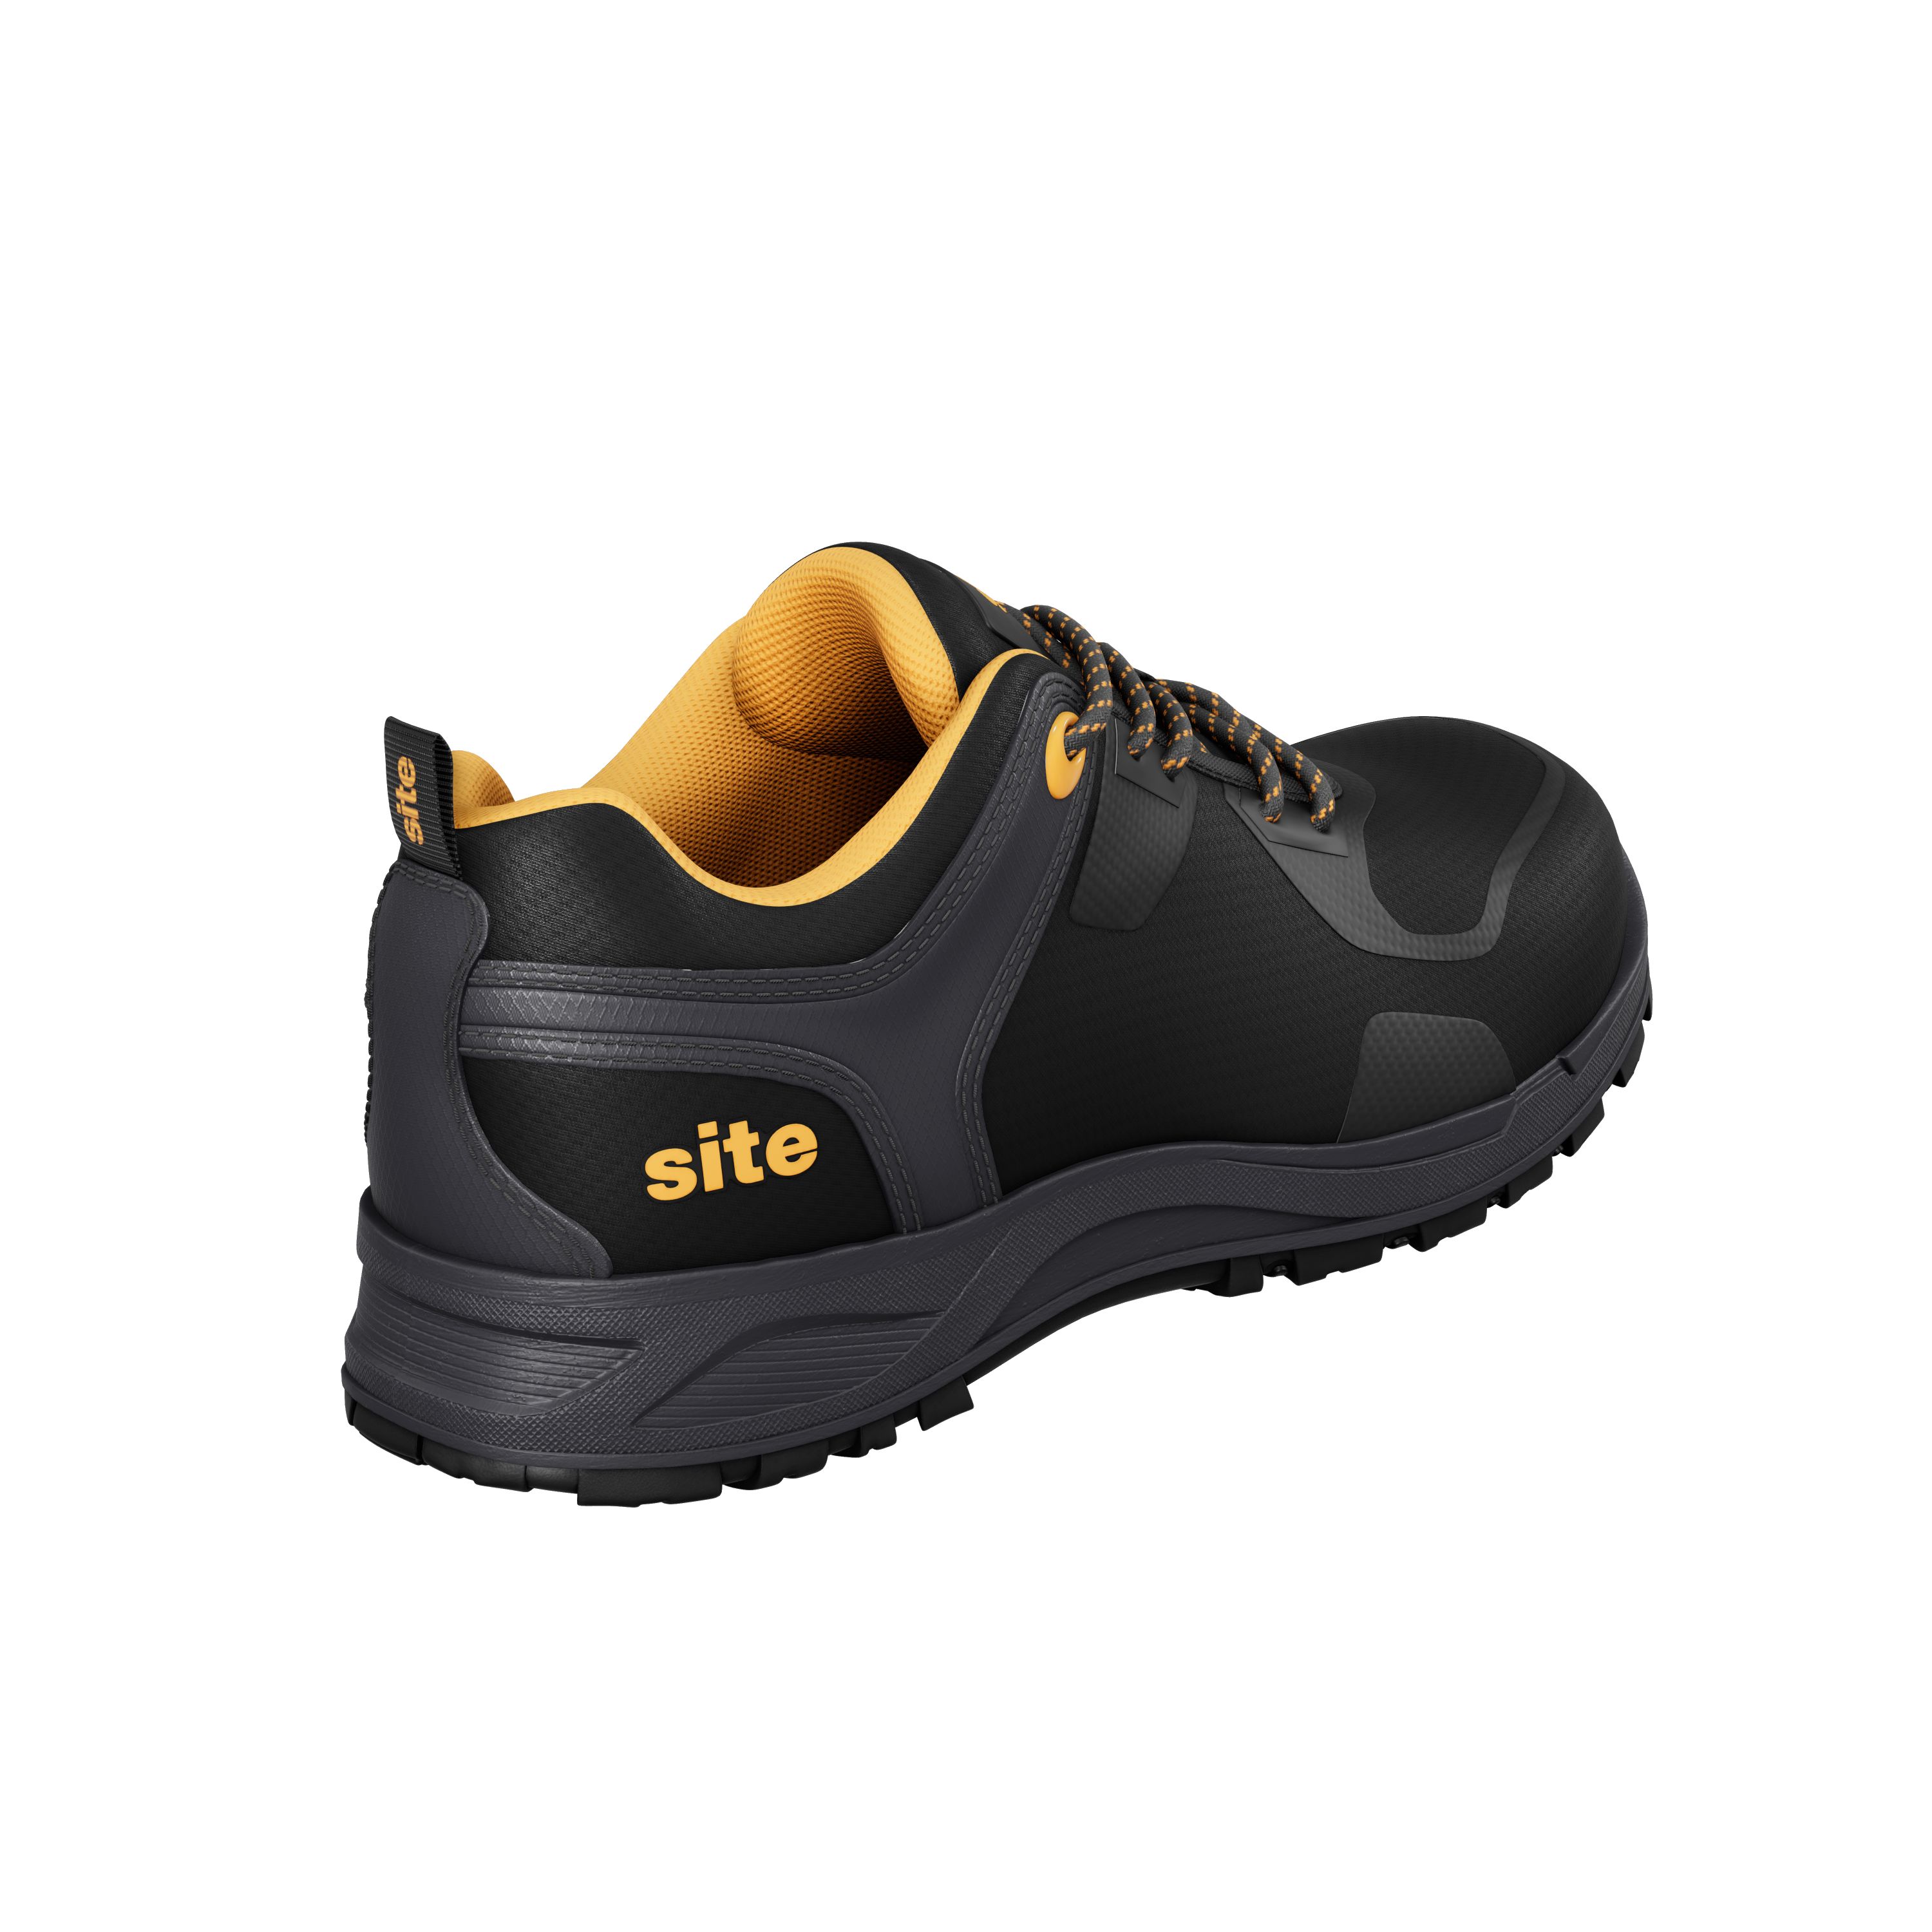 Site Haydar Black Safety trainers, Size 5